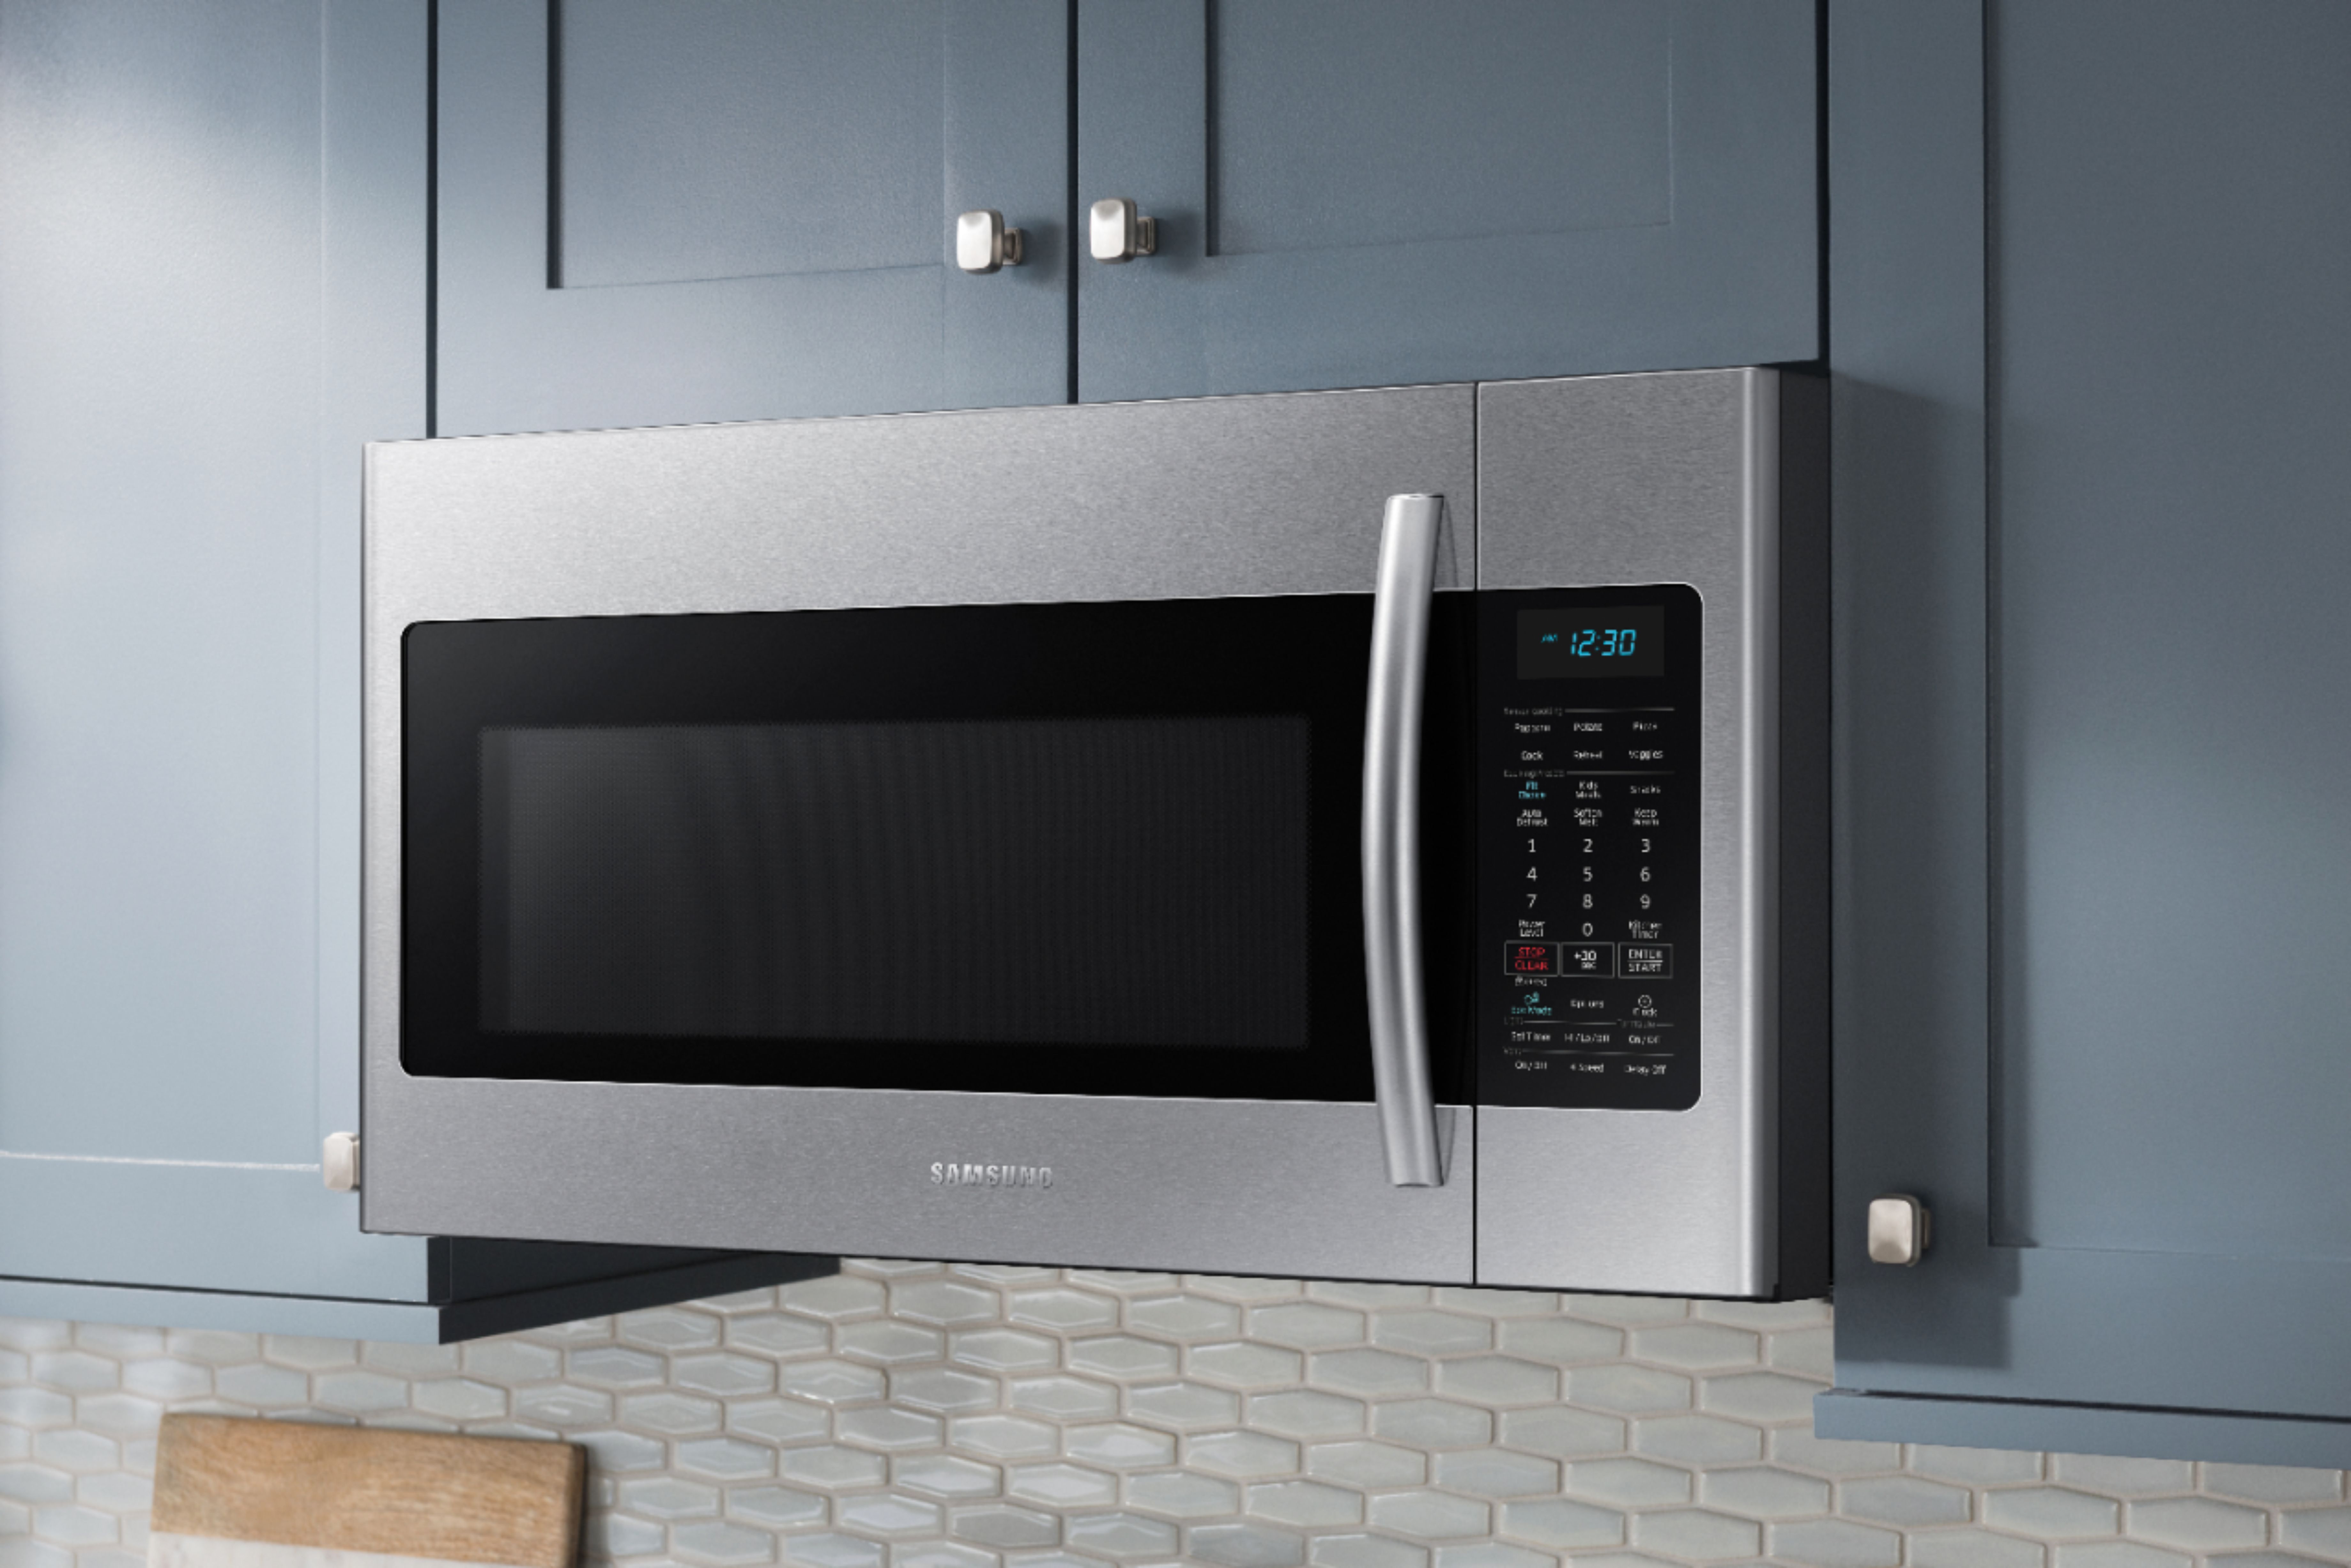 Samsung - 1.8 cu. ft. Over-the-Range Microwave with Sensor Cooking